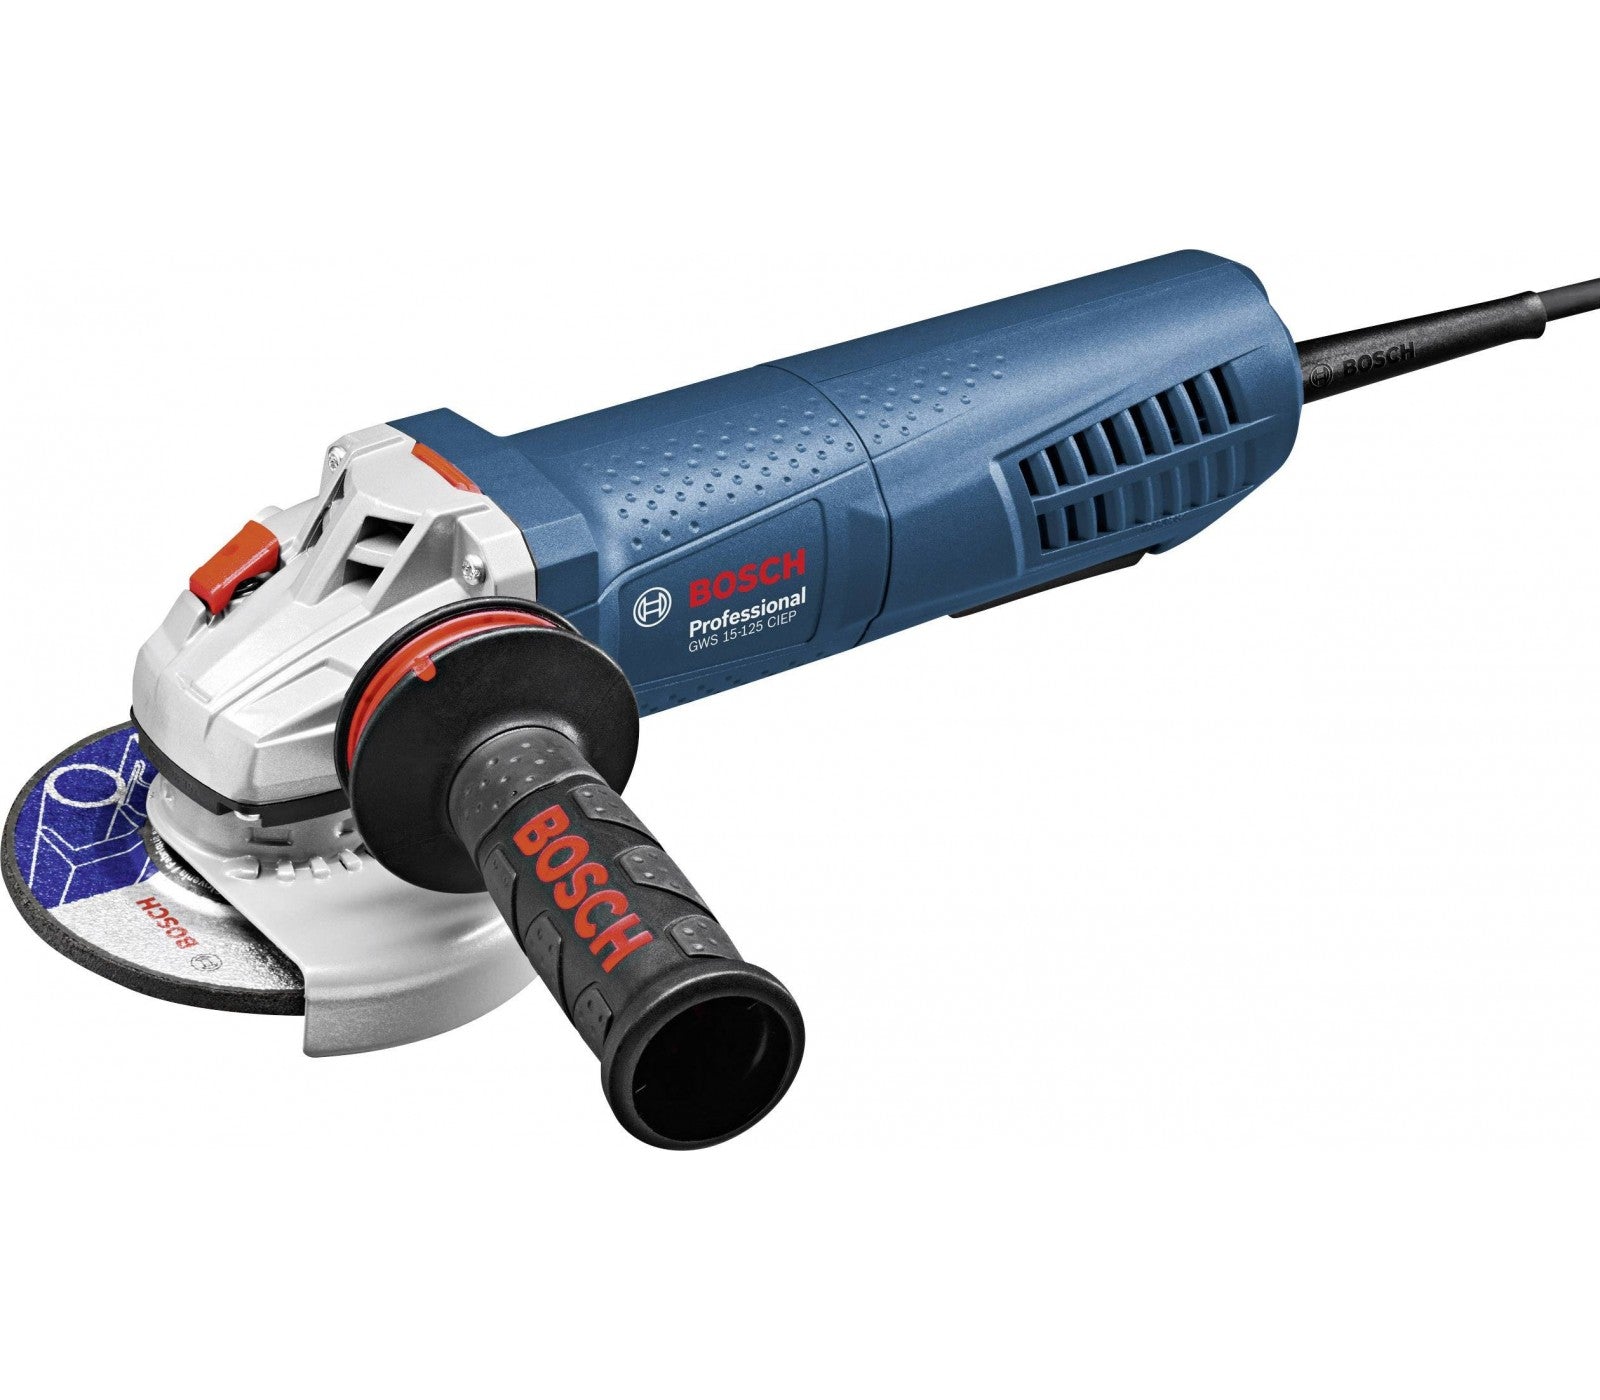 Bosch Professional Angle Grinder GWS 15-125CIEP 0601796202 Power Tool Services